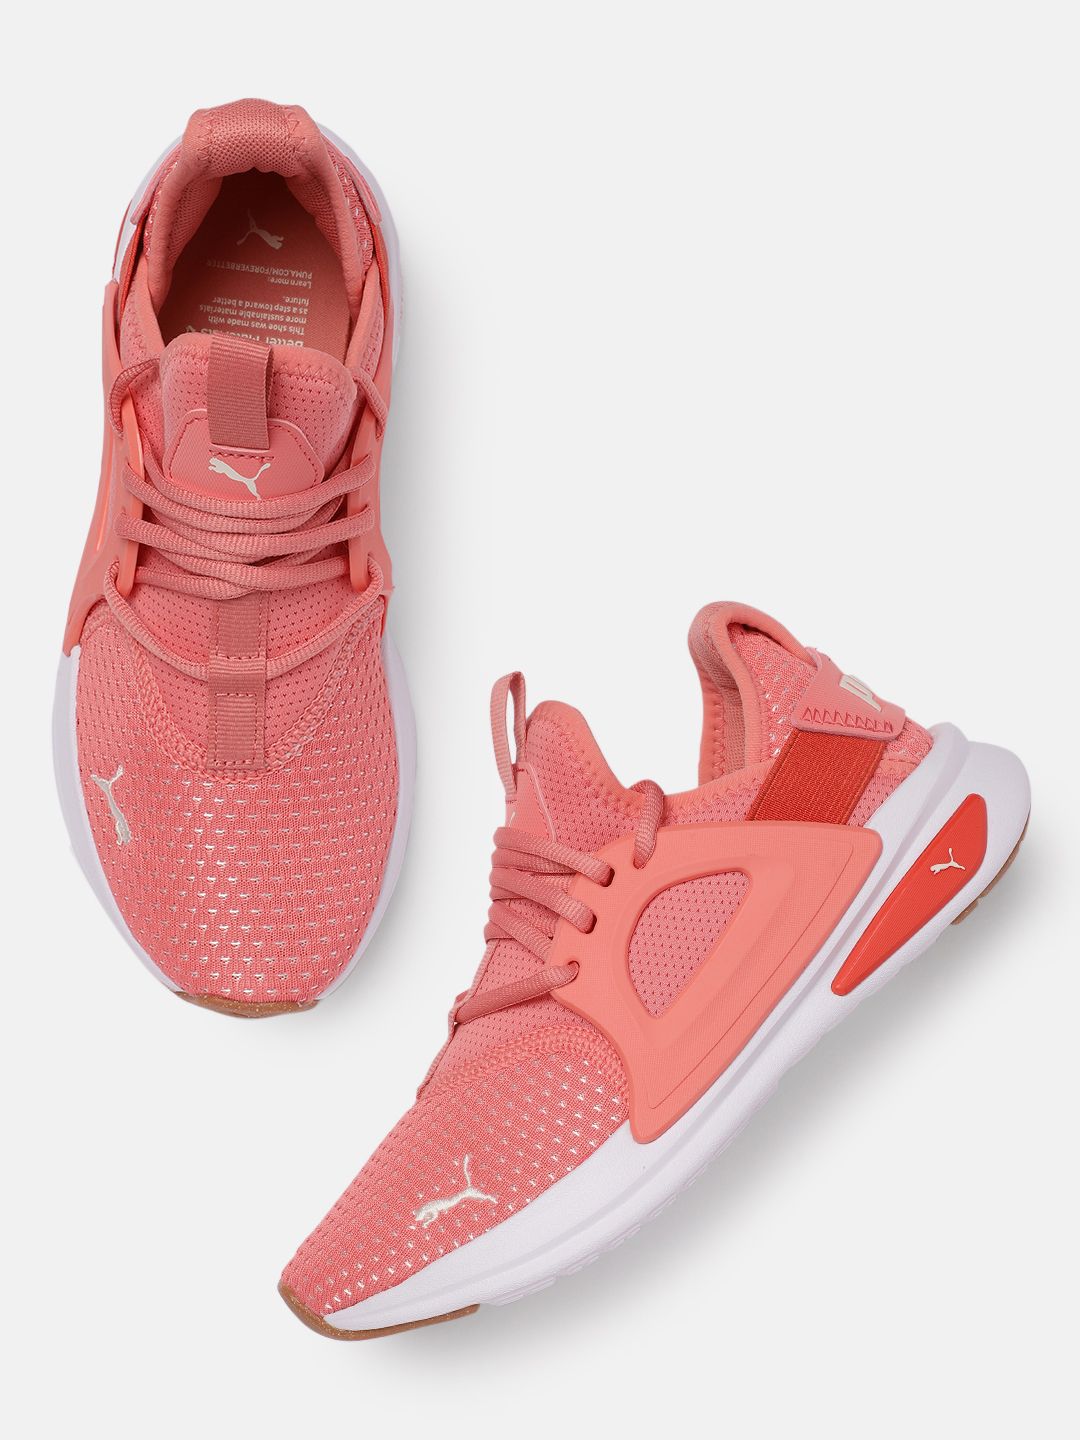 Puma Unisex Pink Softride Enzo Evo Better Running Shoes Price in India